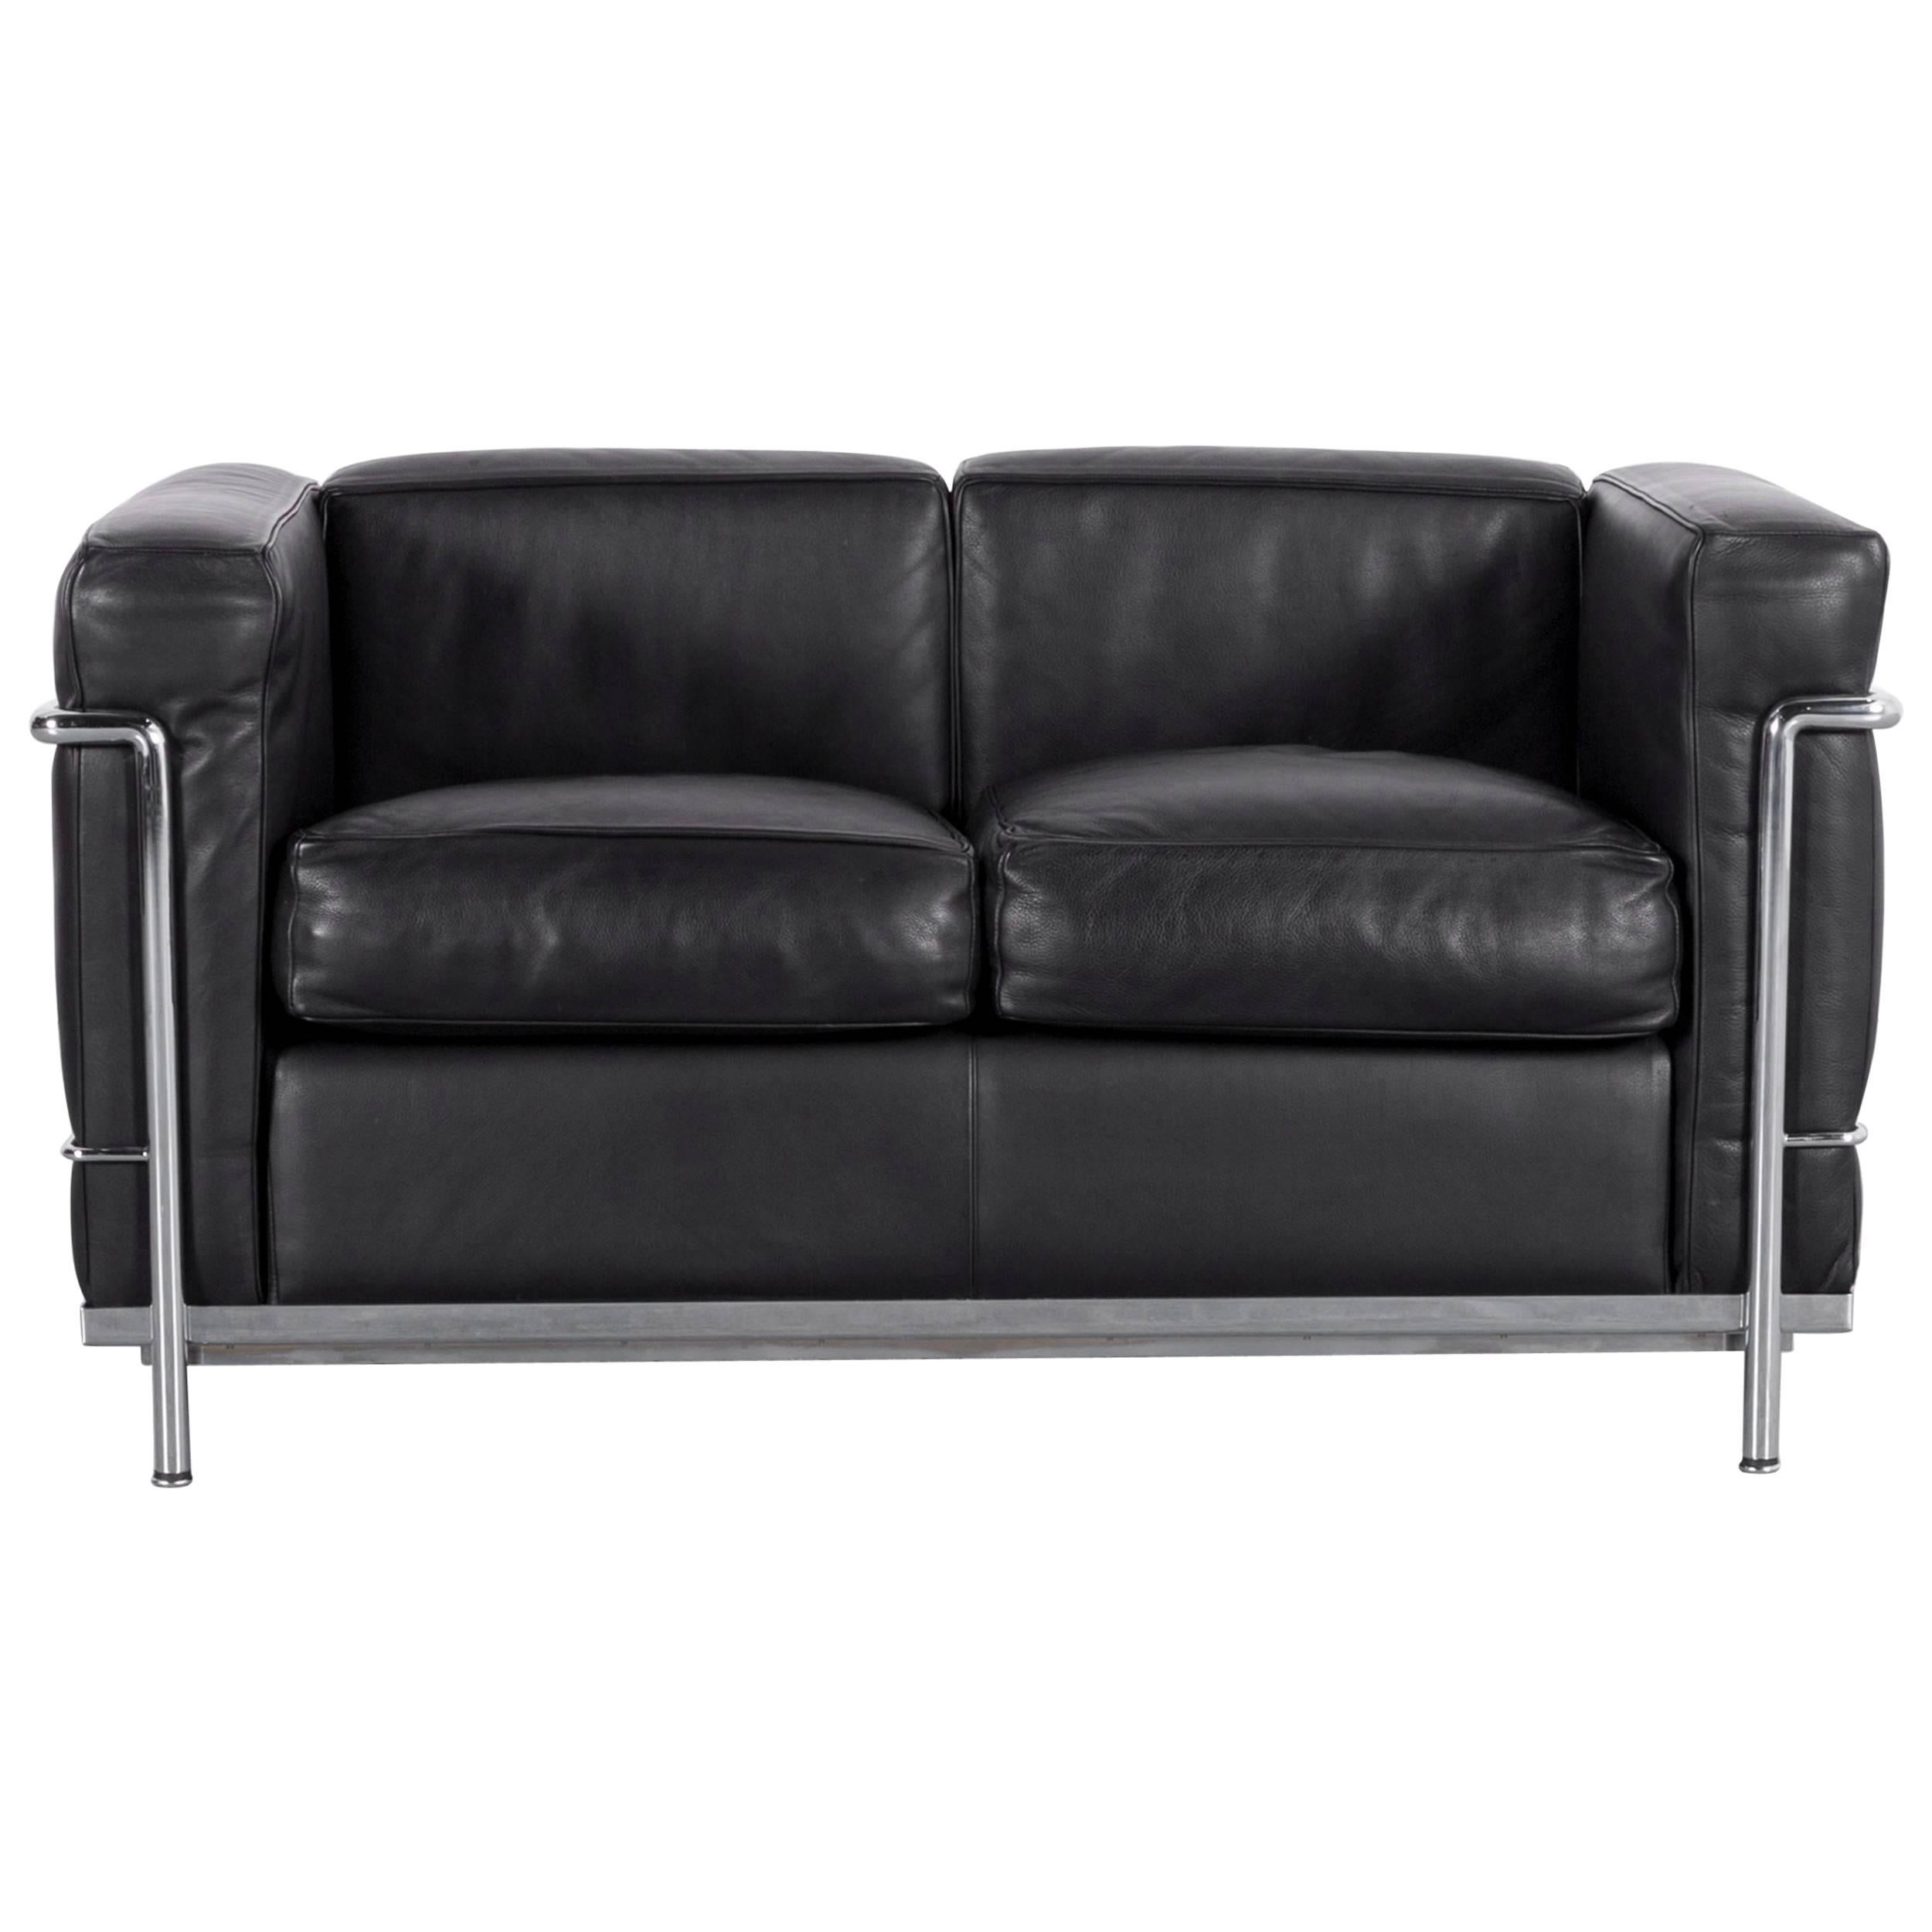 Cassina Le Corbusier LC 2 Leather Sofa Black Two-Seat For Sale